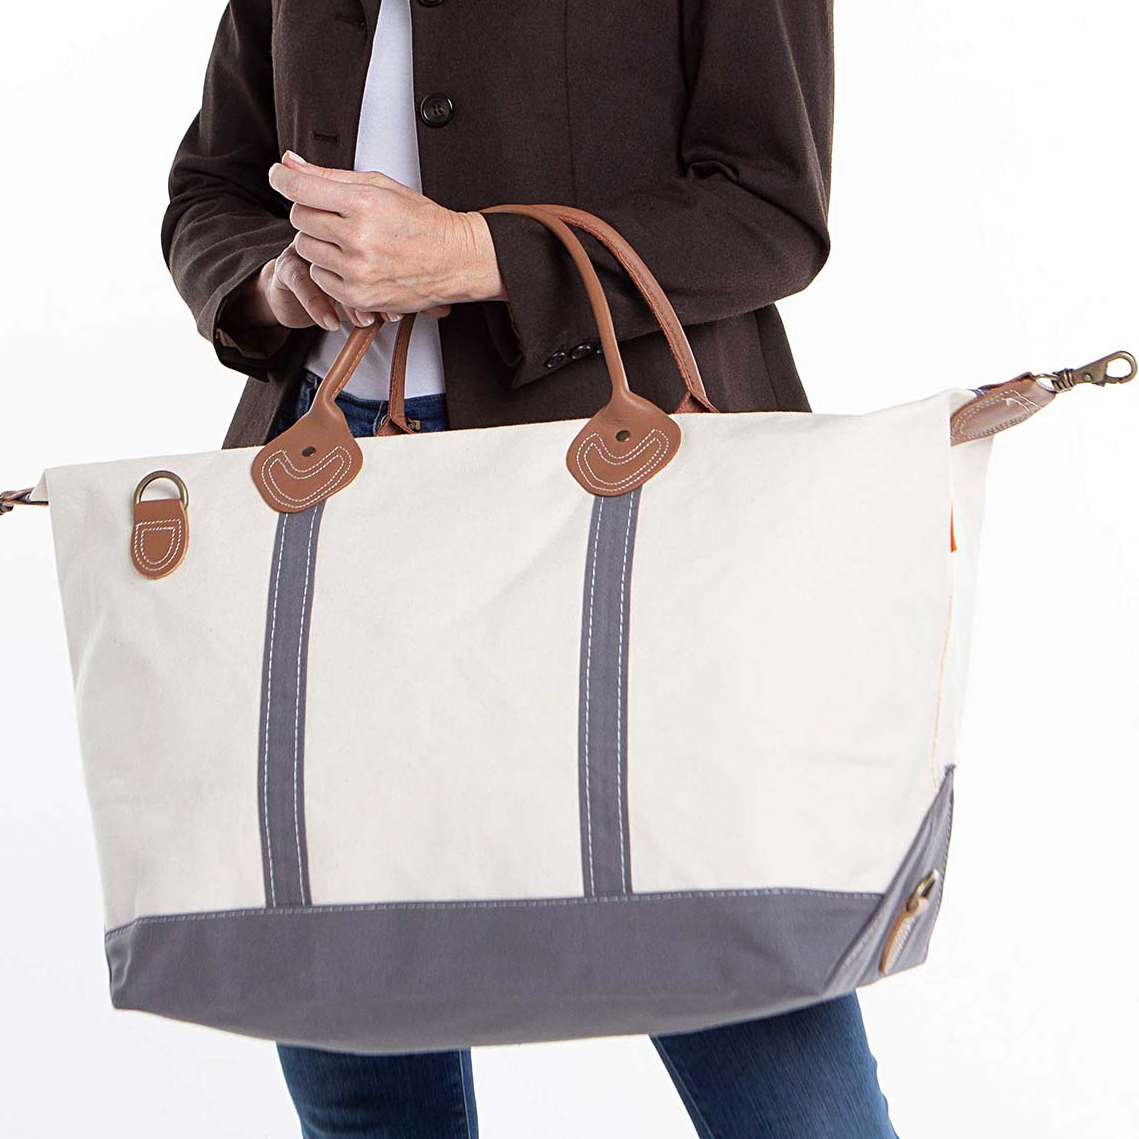 Oversized Canvas Weekender Duffle Bag - Happy Thoughts Gifts